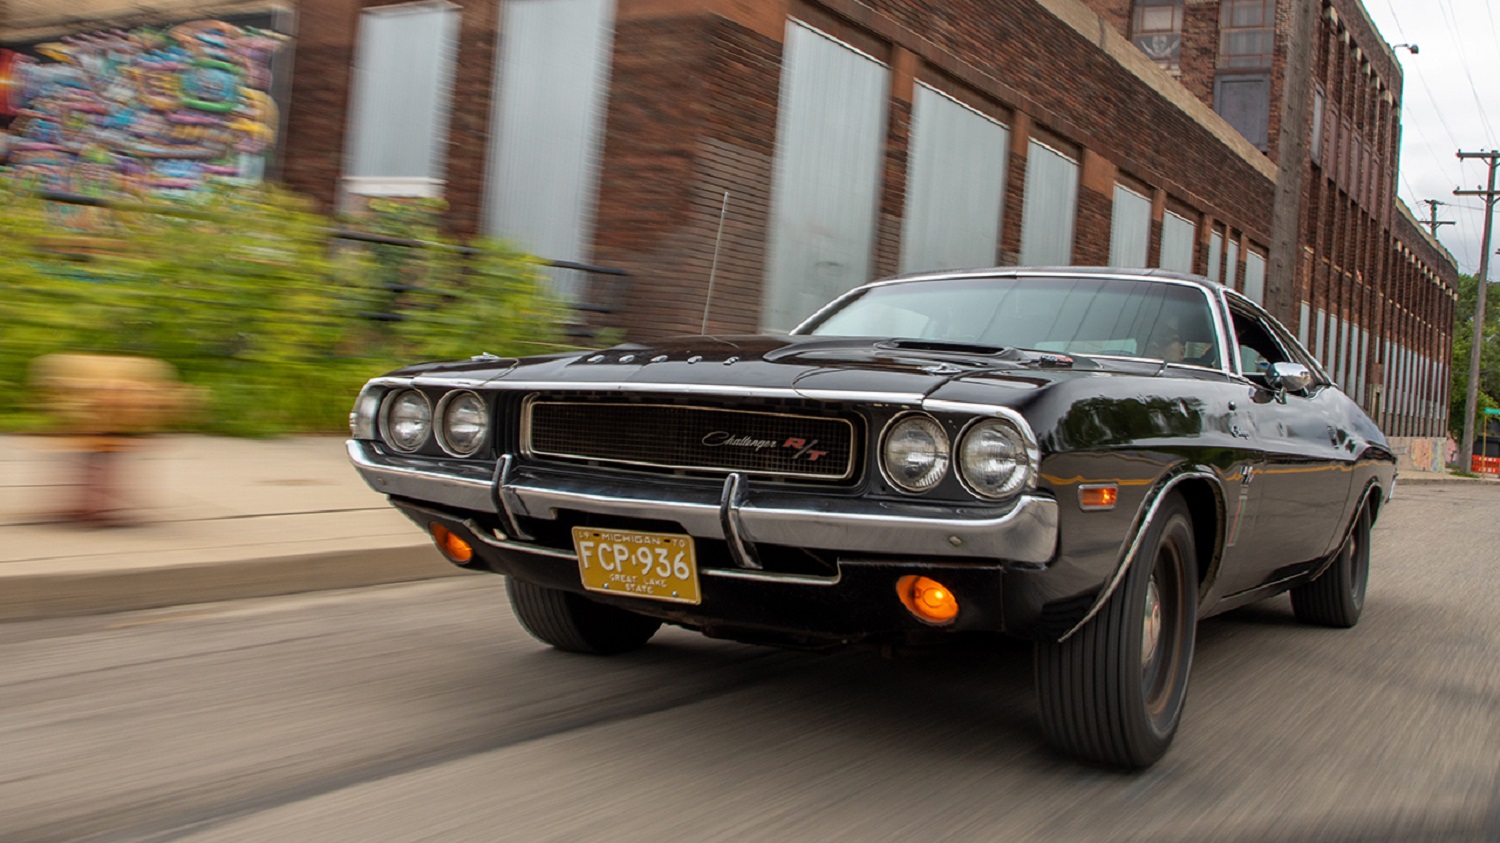 The 1970 Dodge Challenger R/T SE Black Ghost is heading for sale at an auction.